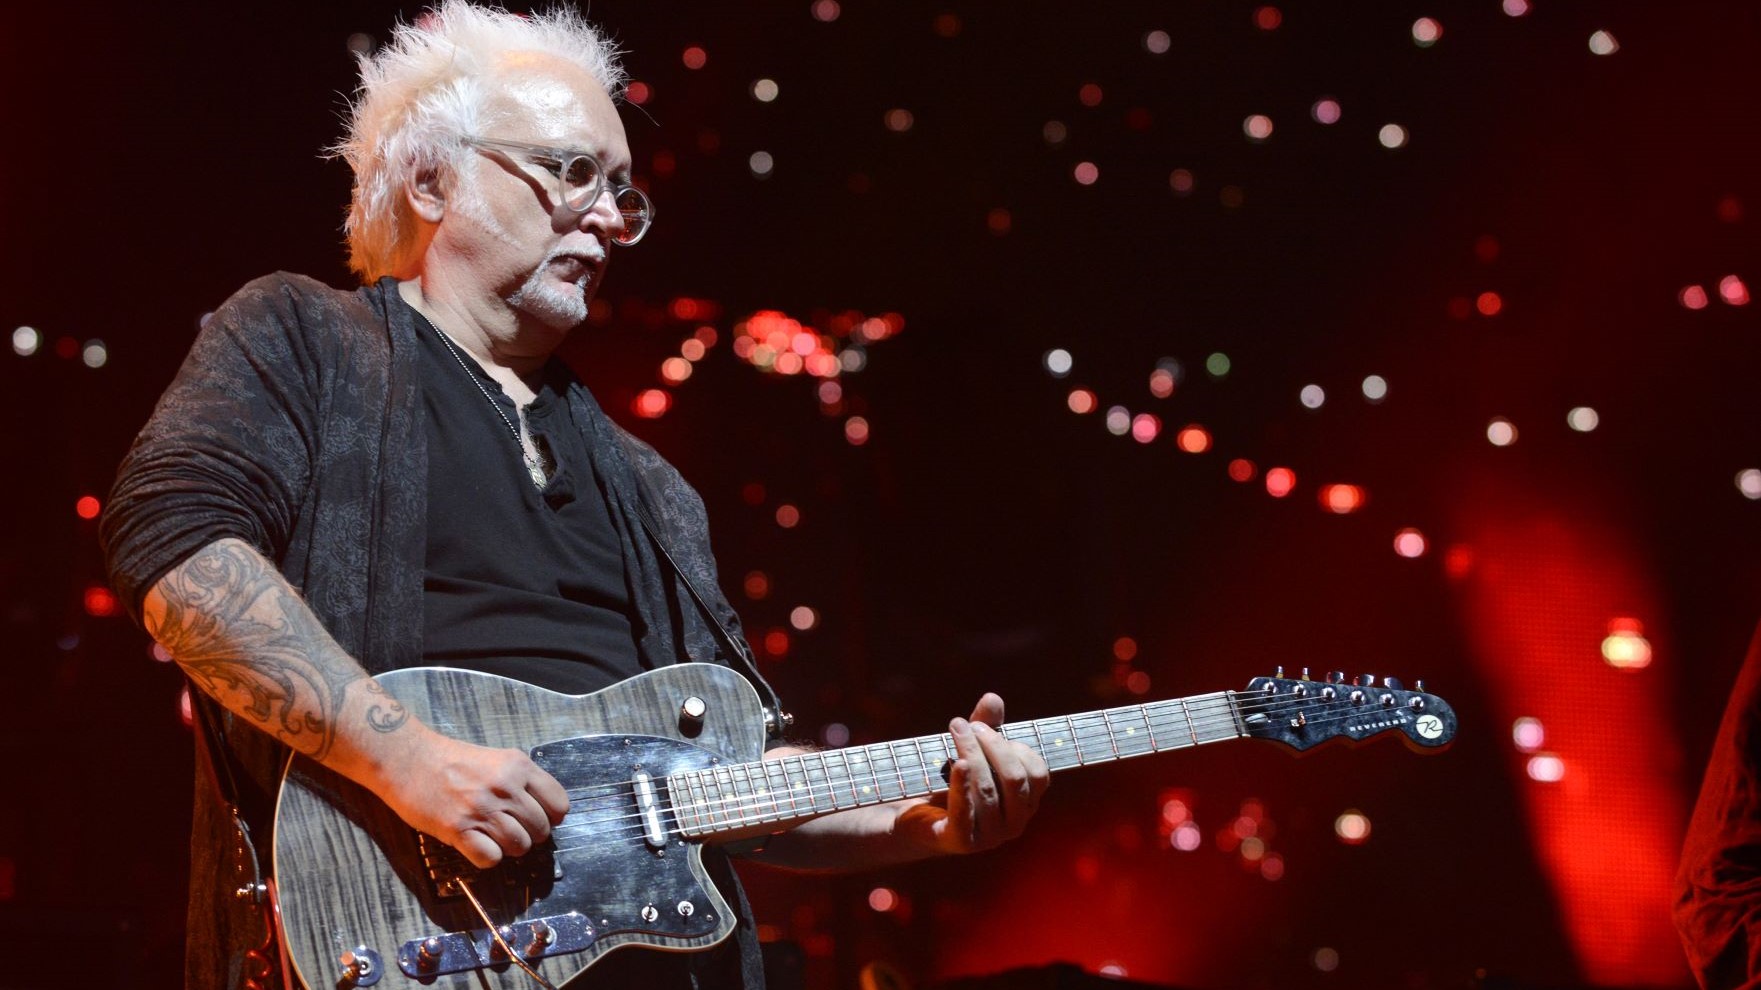 I Played the Track With My Eyes Closed, and I Would See Him”: The Cure  Guitarist Reeves Gabrels Talks Recording With and After David Bowie |  GuitarPlayer